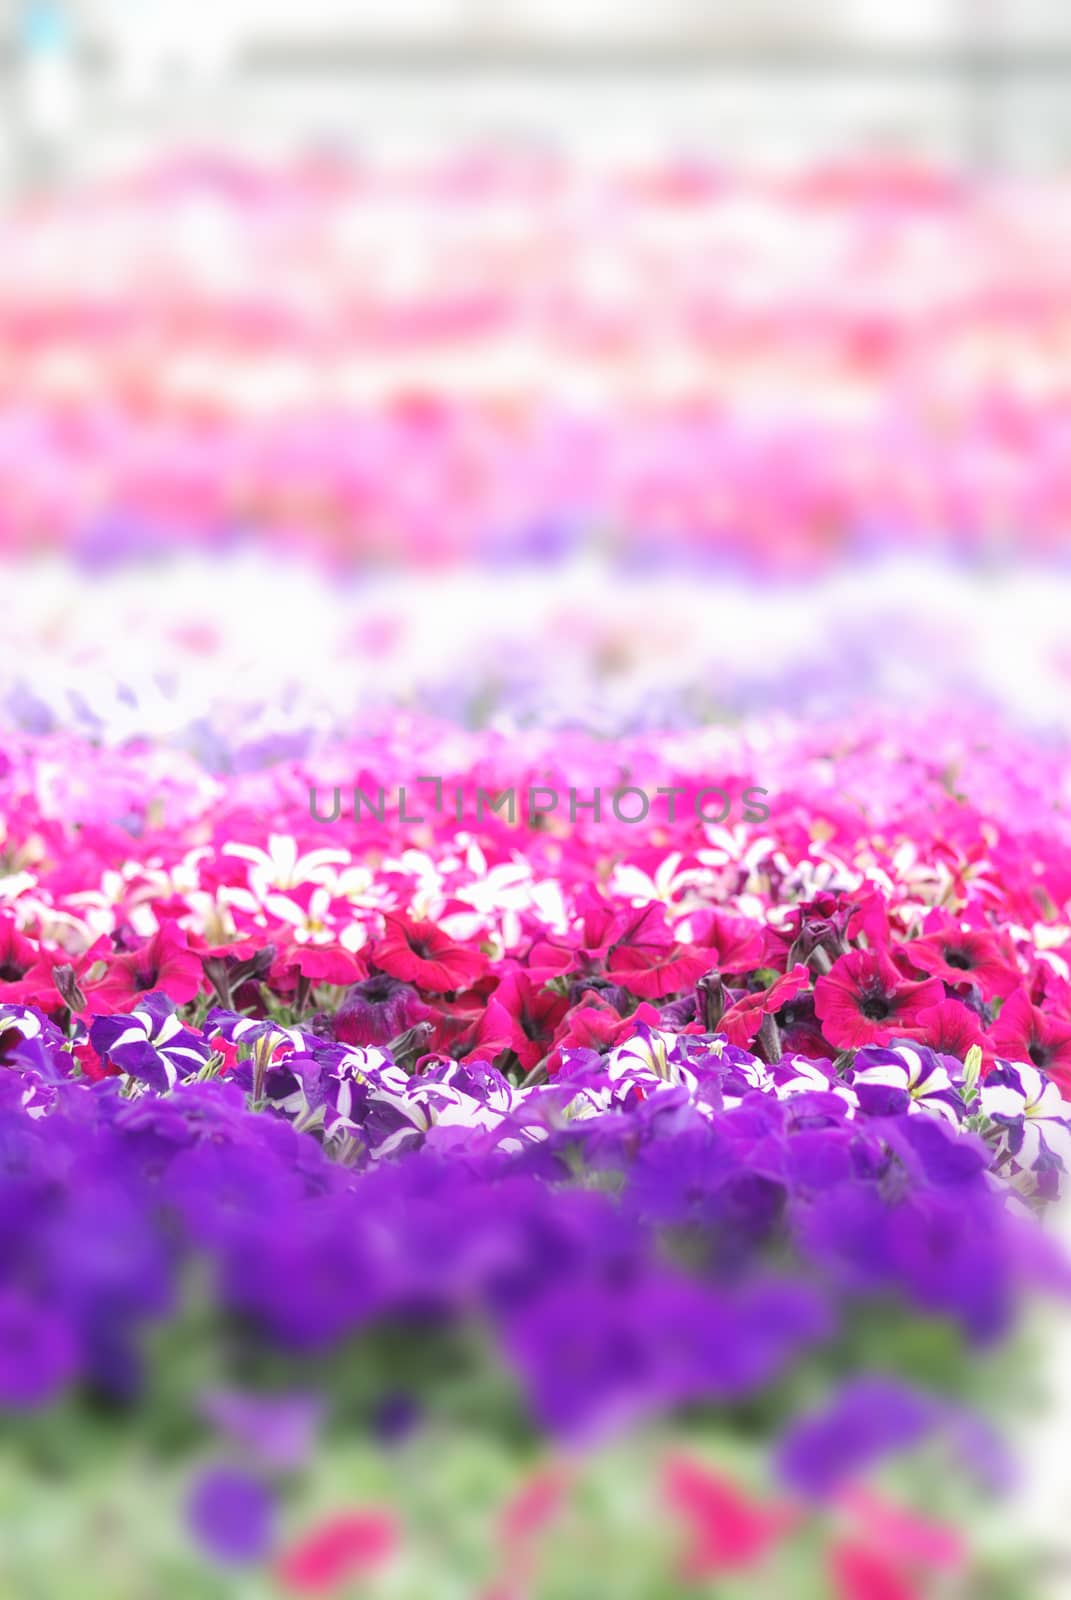 Colorful petunia flowers, Grandiflora is the most popular variet by yuiyuize